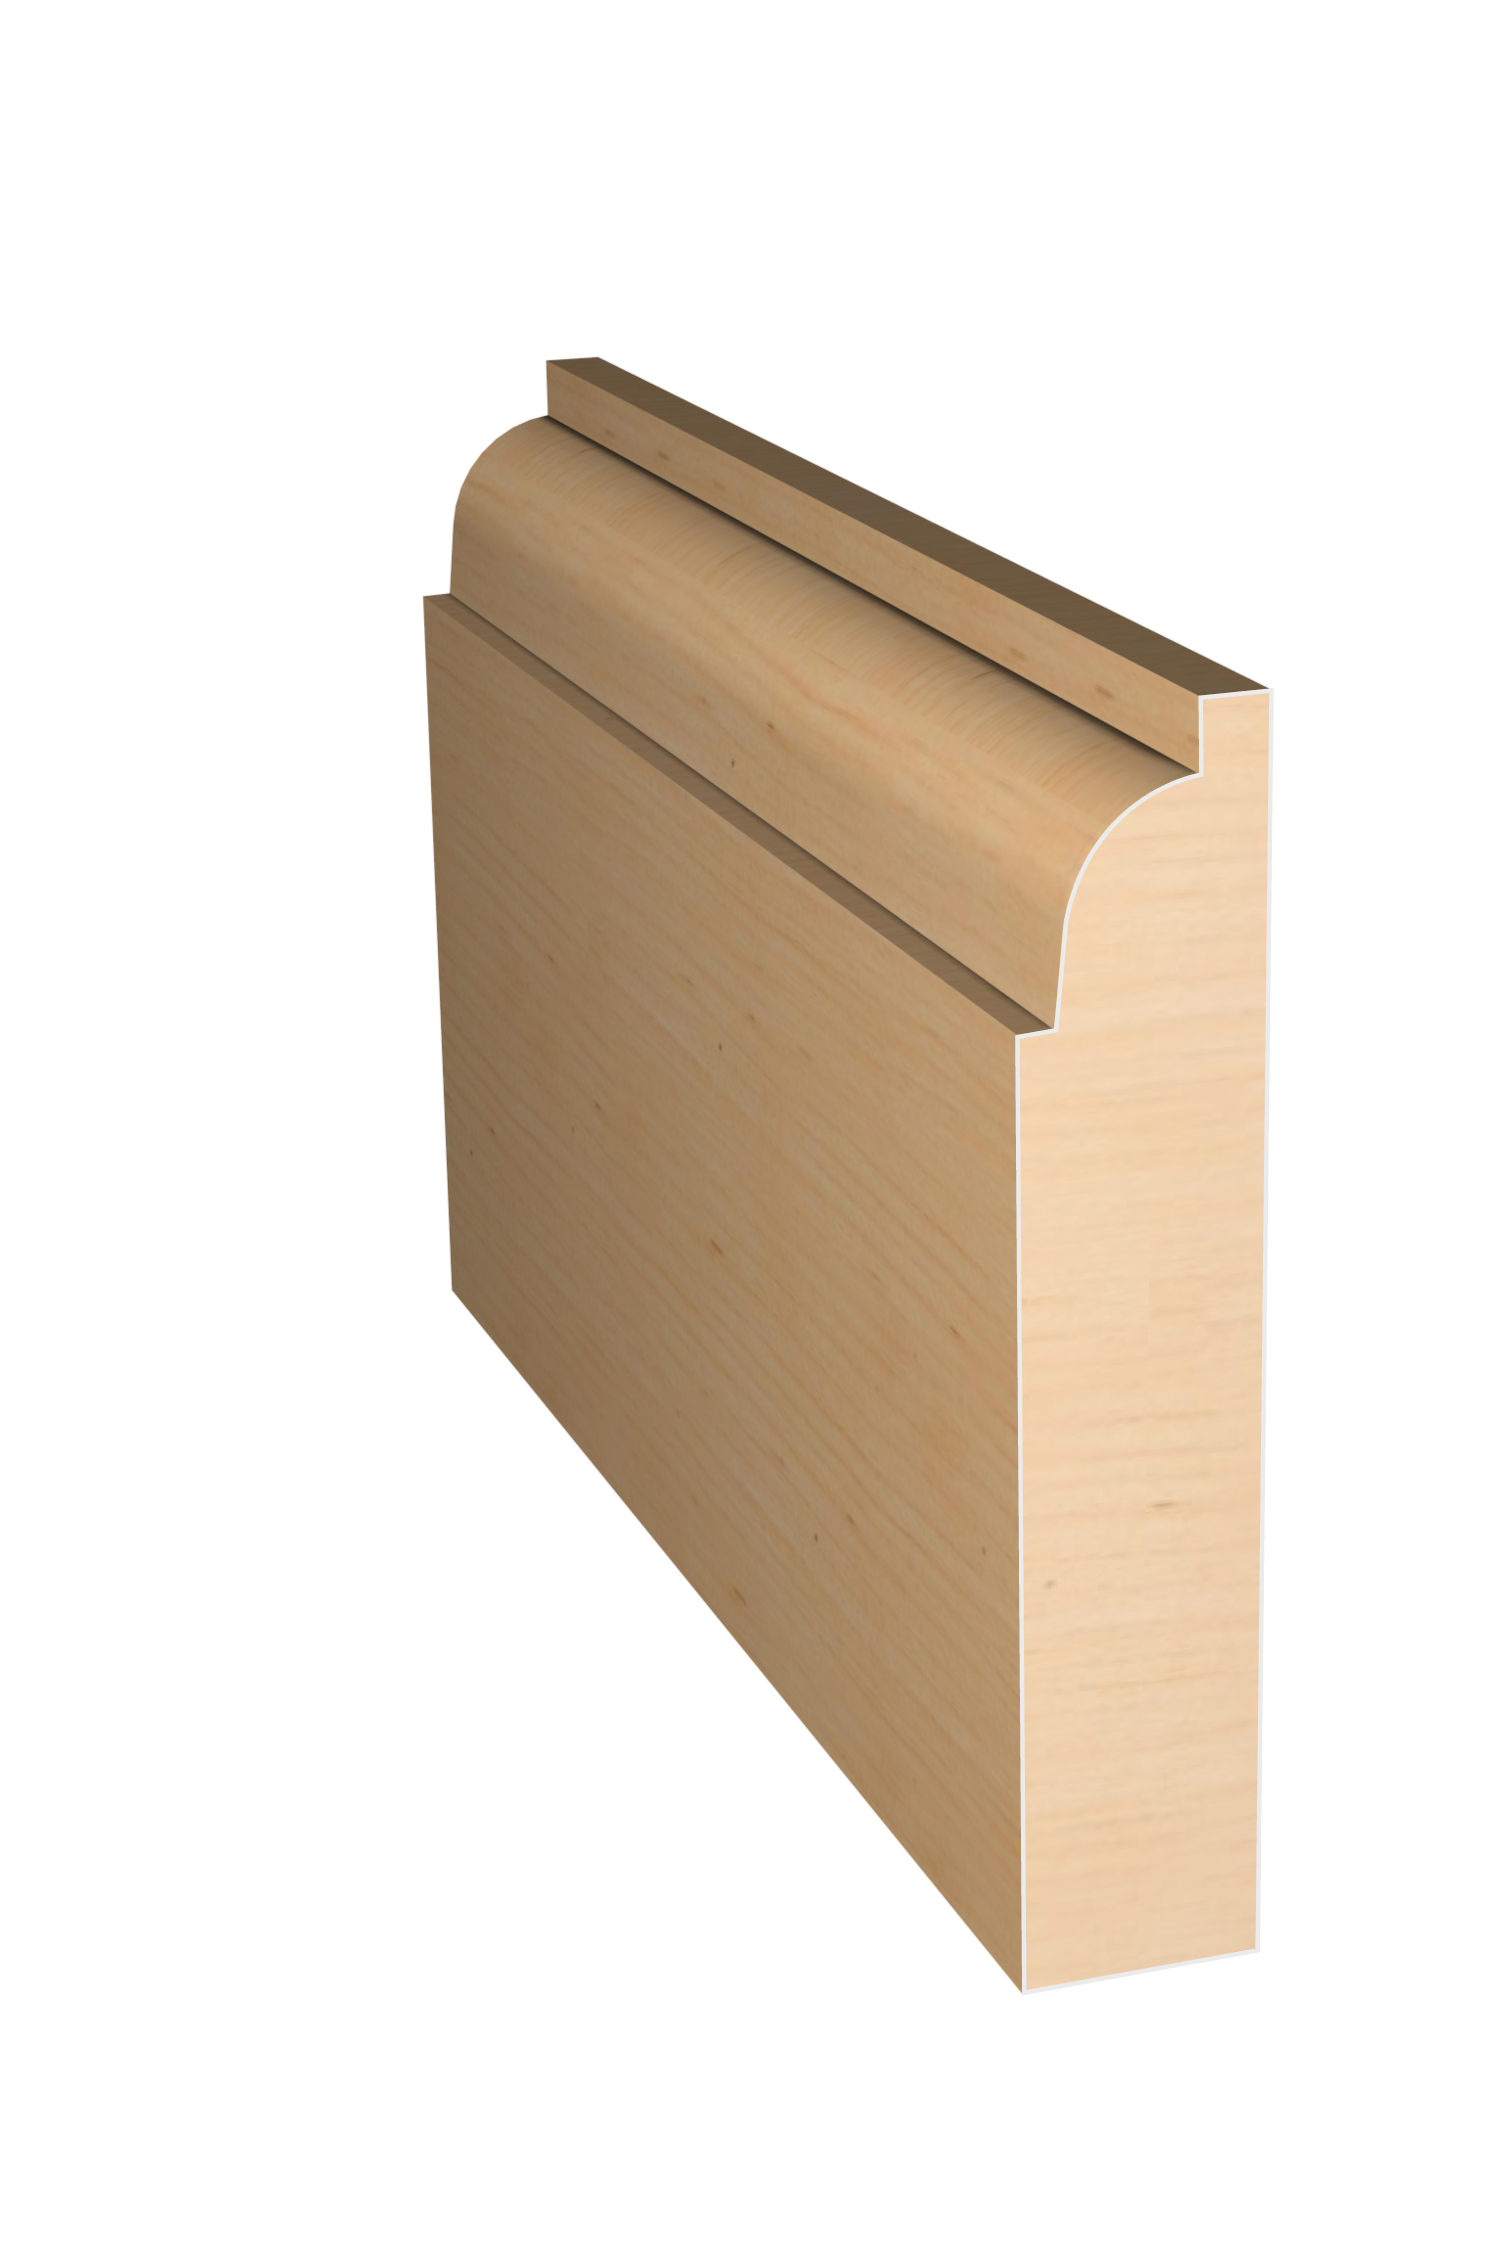 Three dimensional rendering of custom casing wood molding CAPL31232 made by Public Lumber Company in Detroit.